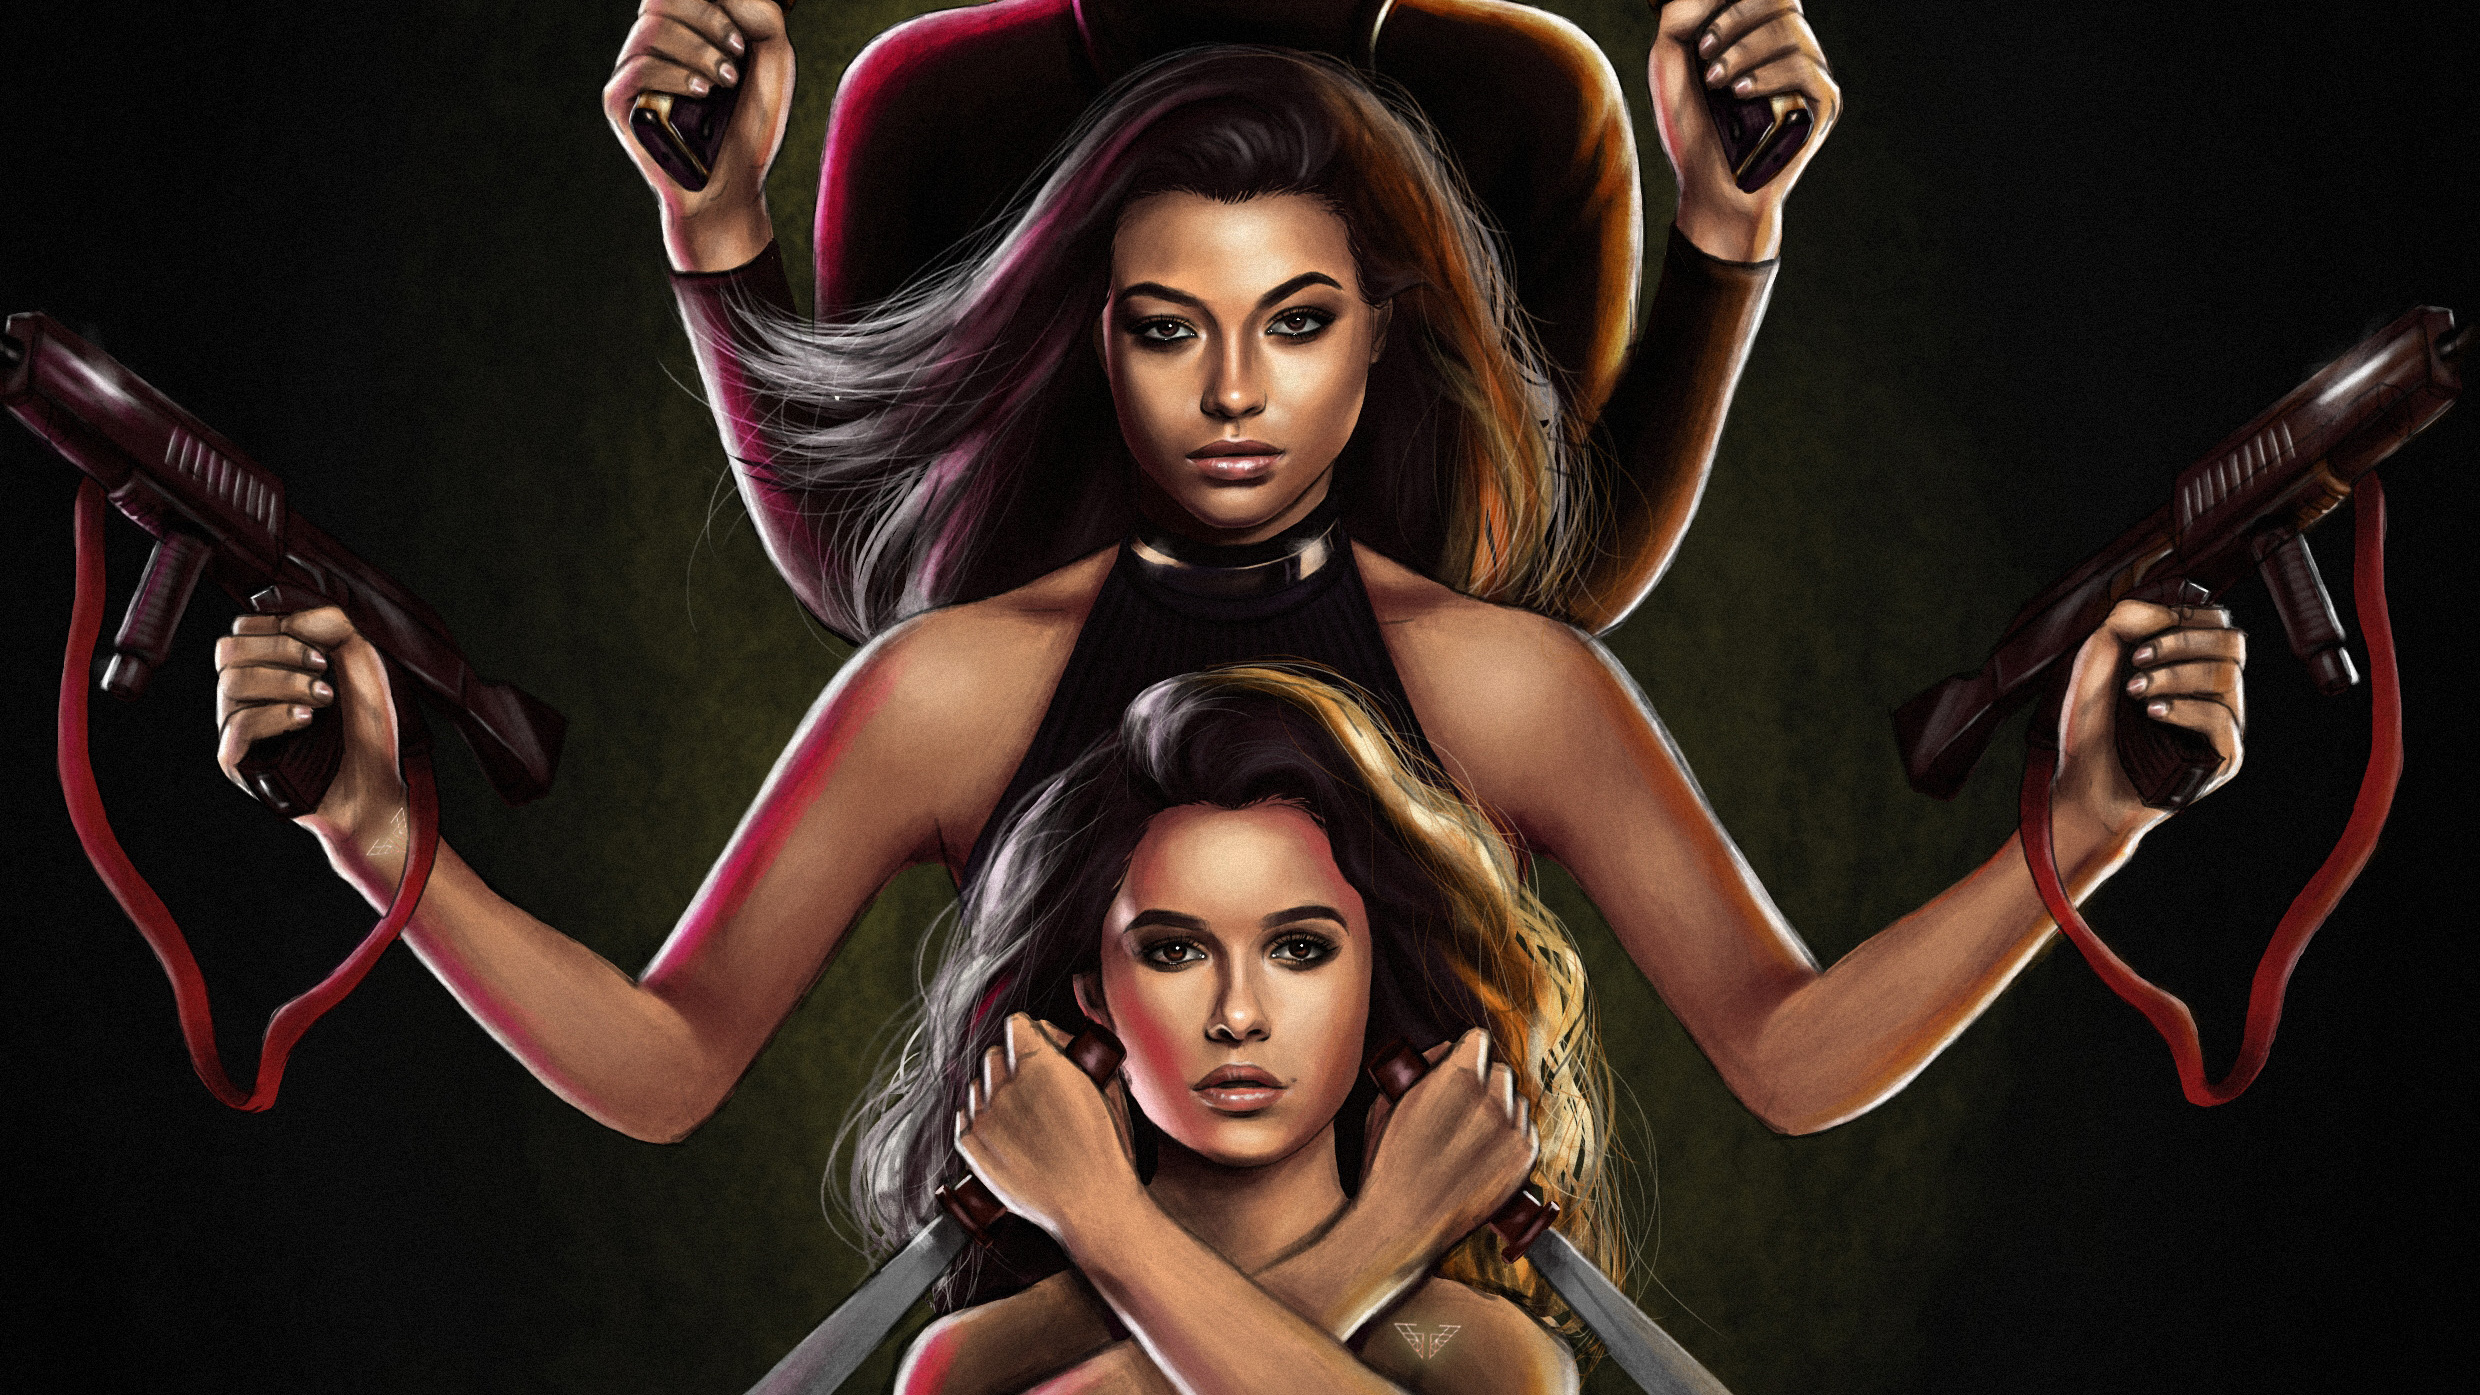 Charlie'S Angels Movie 2019 Wallpapers